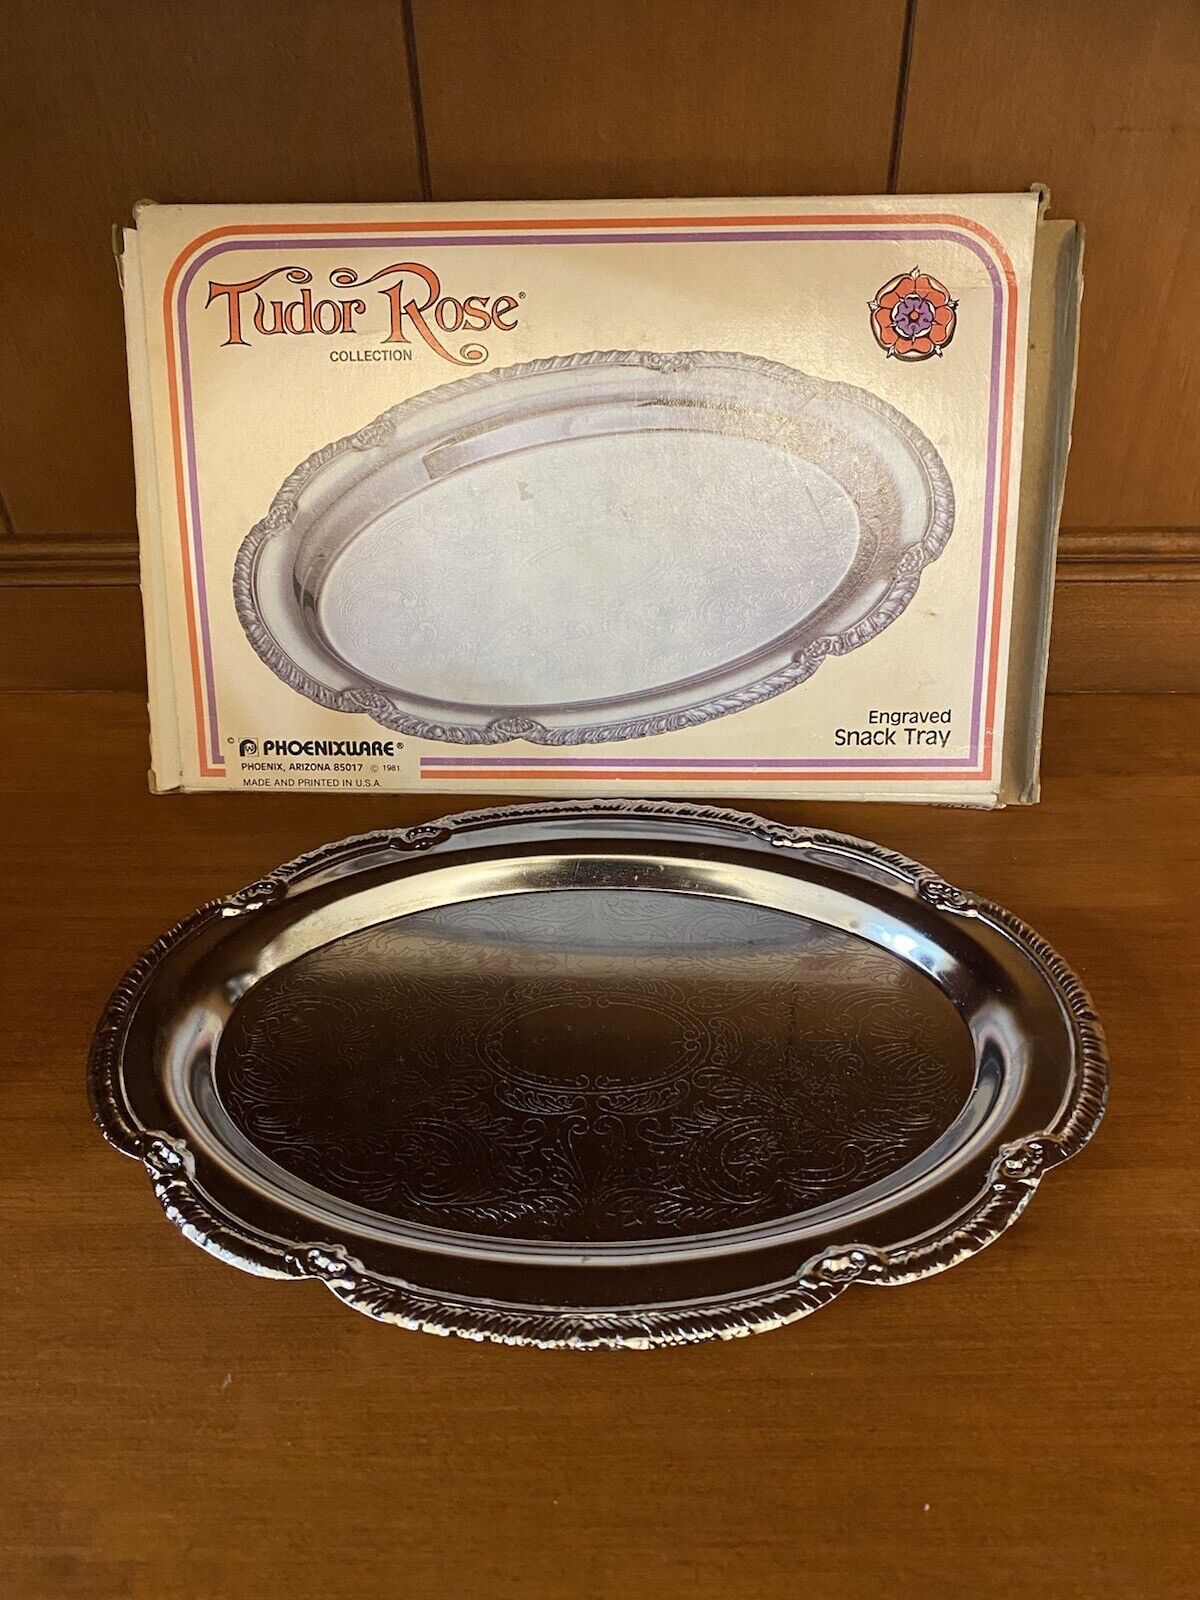 New Vintage Tudor Rose Engraved Snack Tray Phoenixware Made in USA 3081